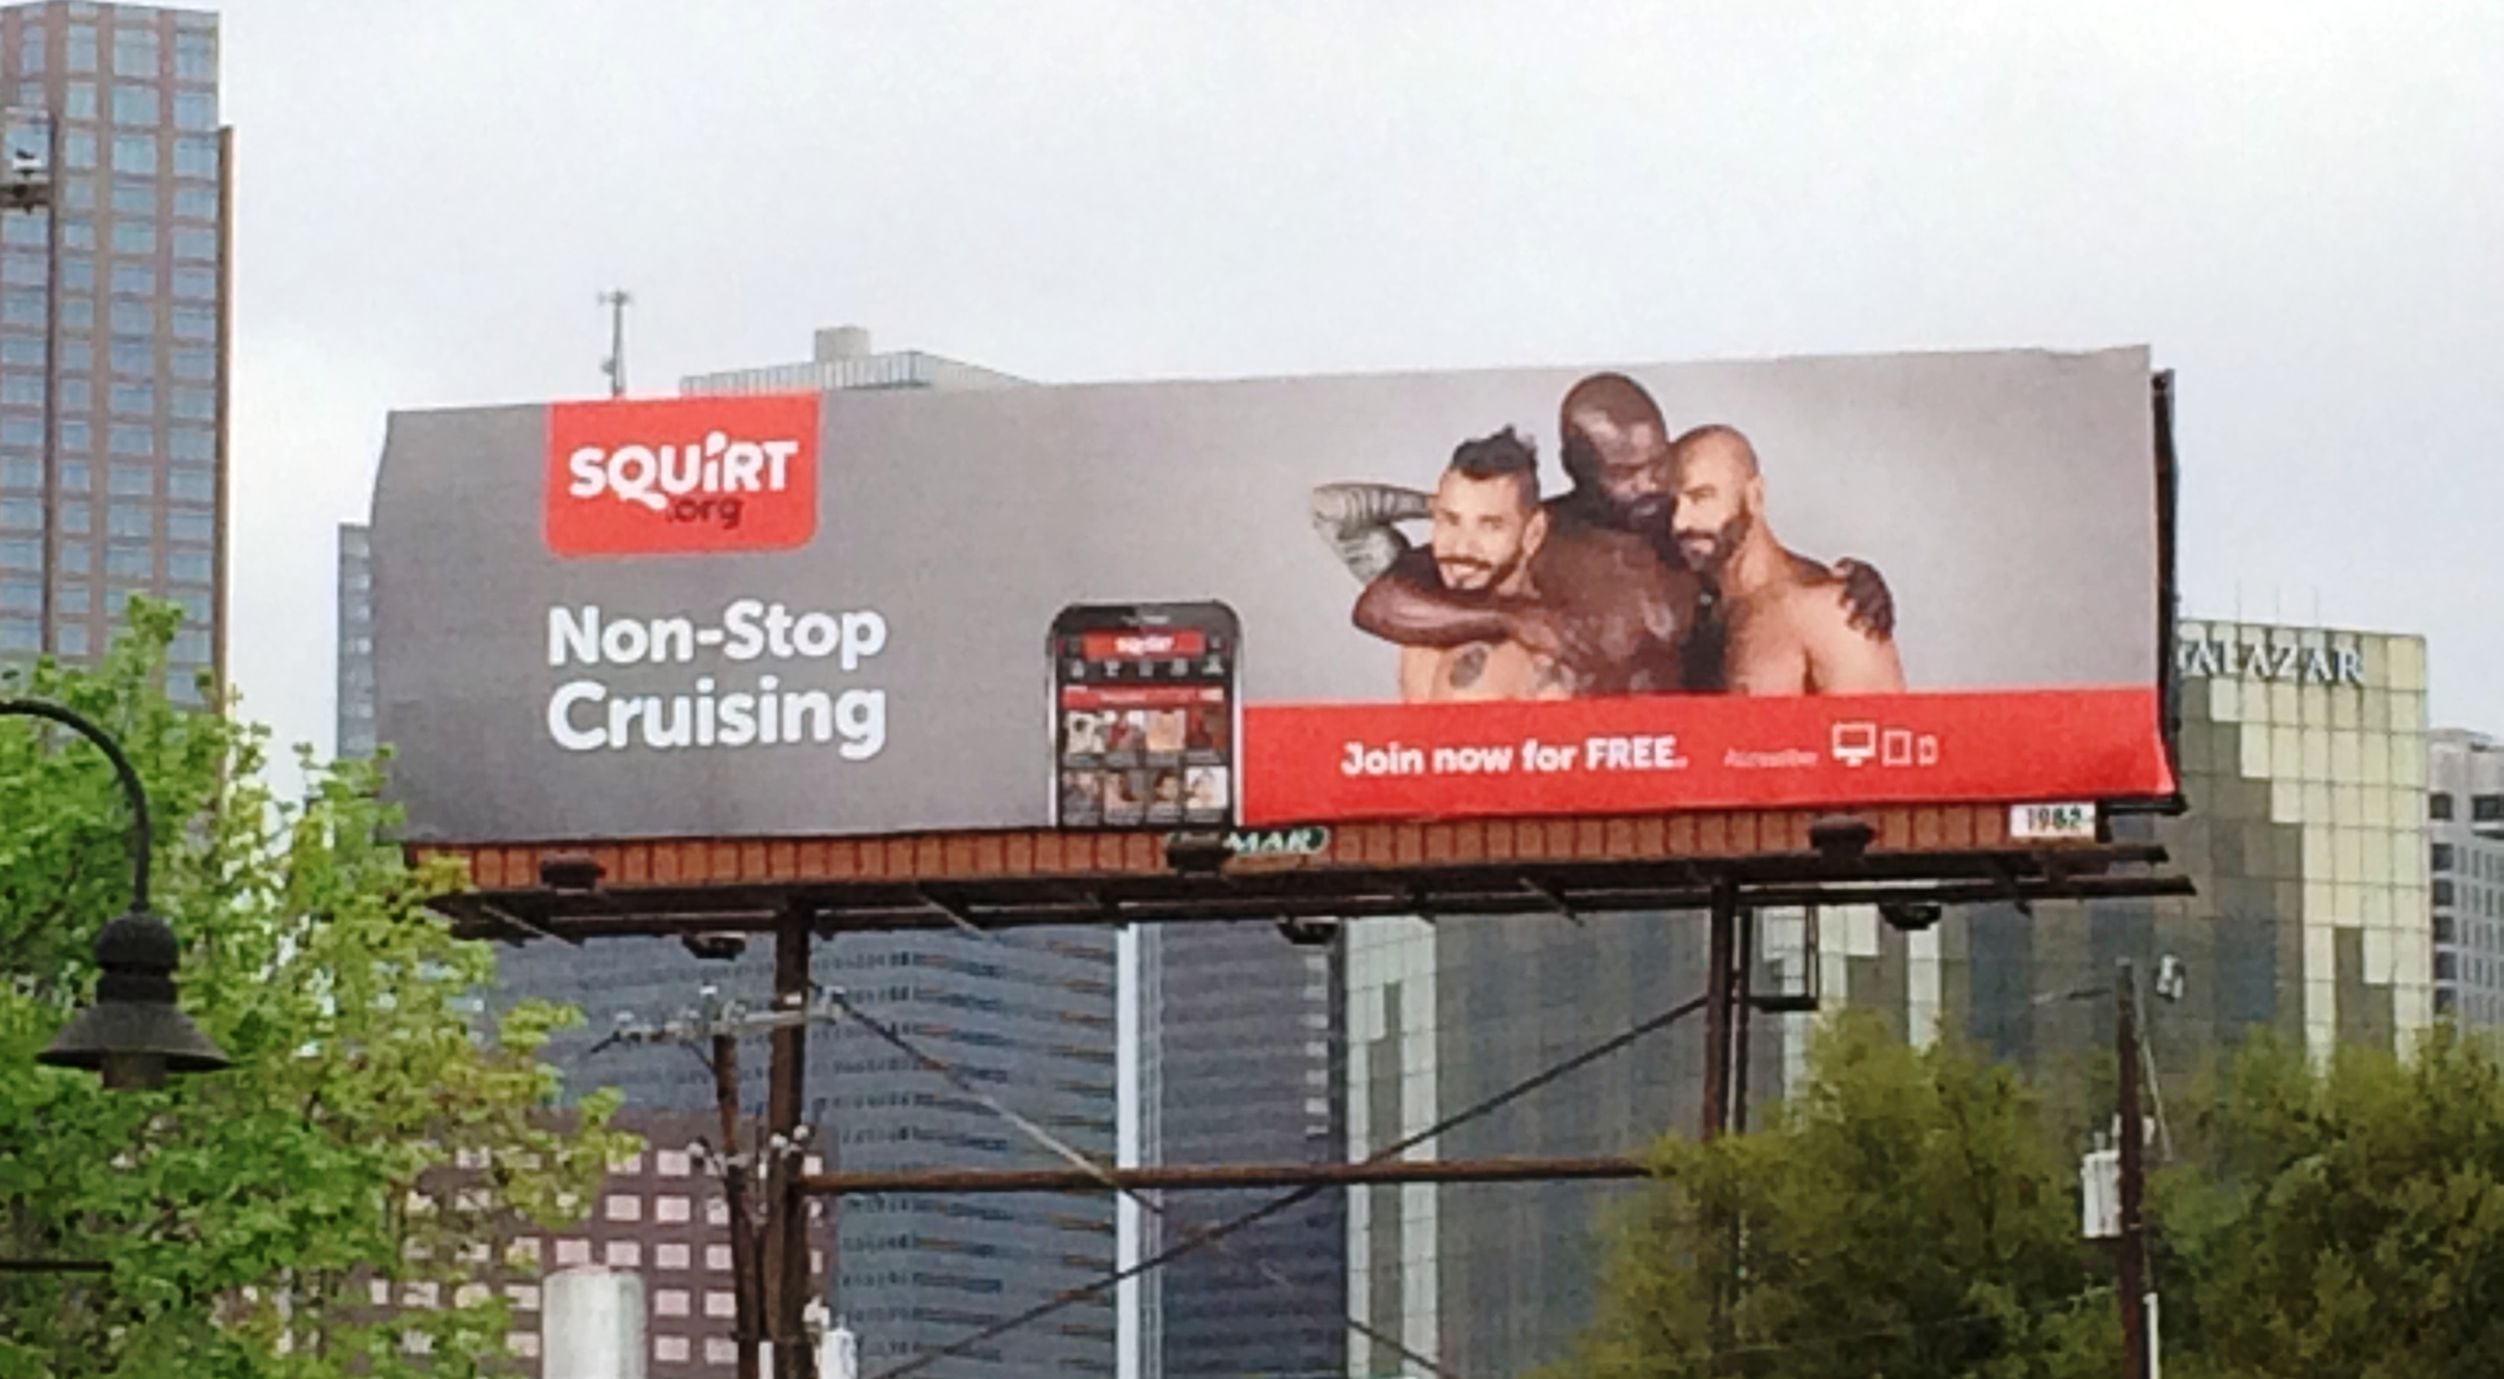 Squirt.org's billboard has no place in Dallas